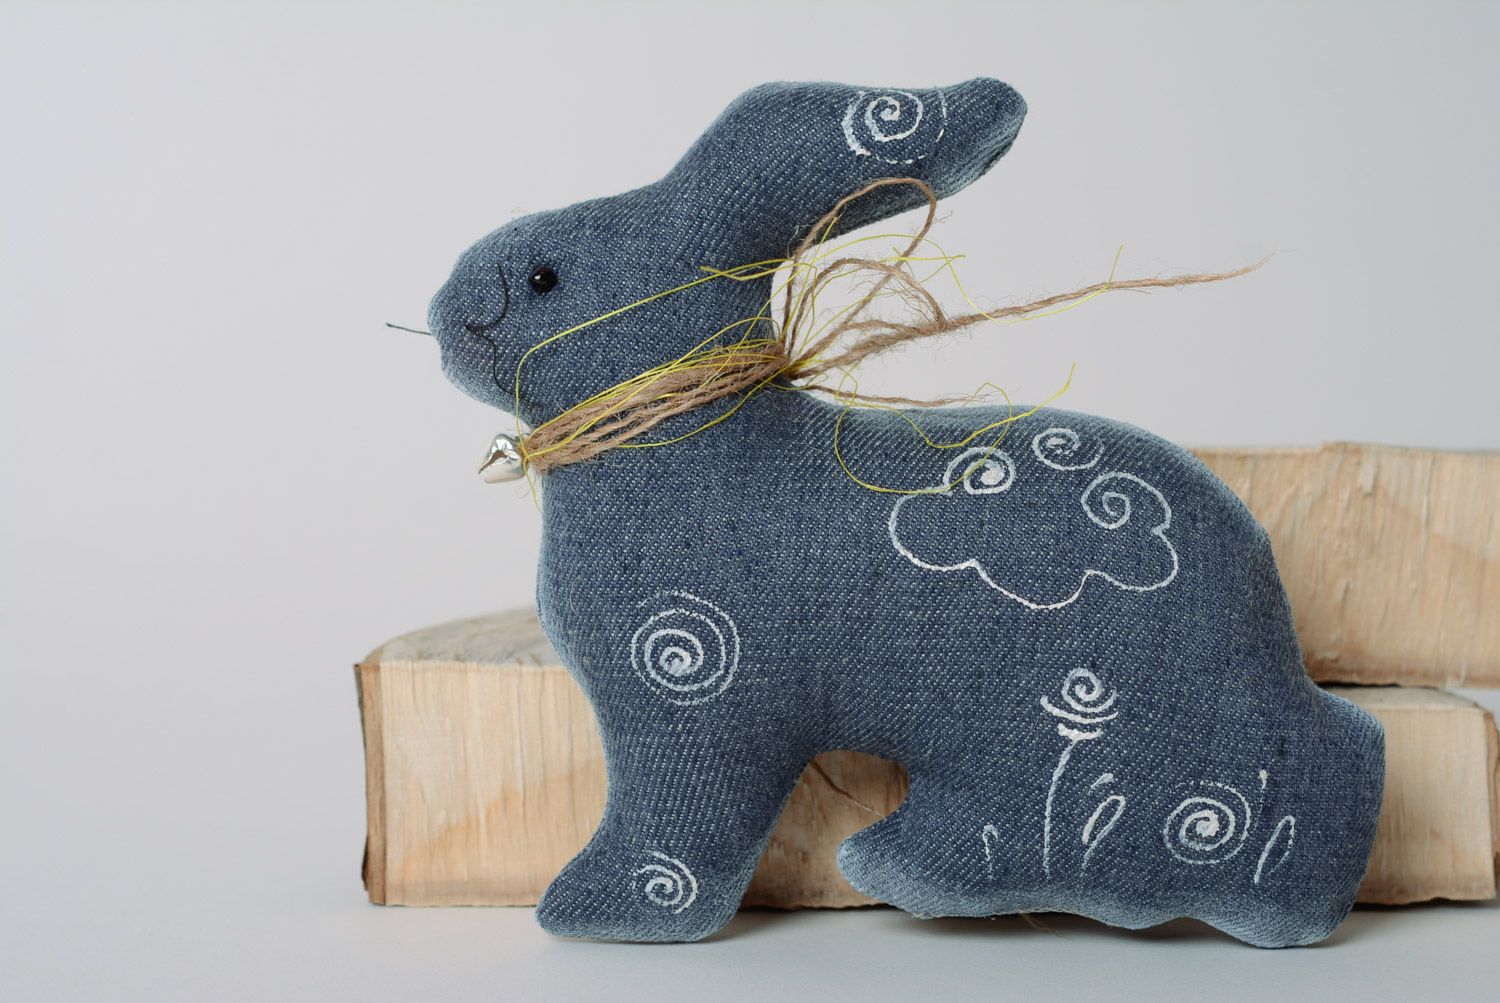 Handmade soft toy sewn of dark blue denim and painted with acrylics Rabbit photo 1